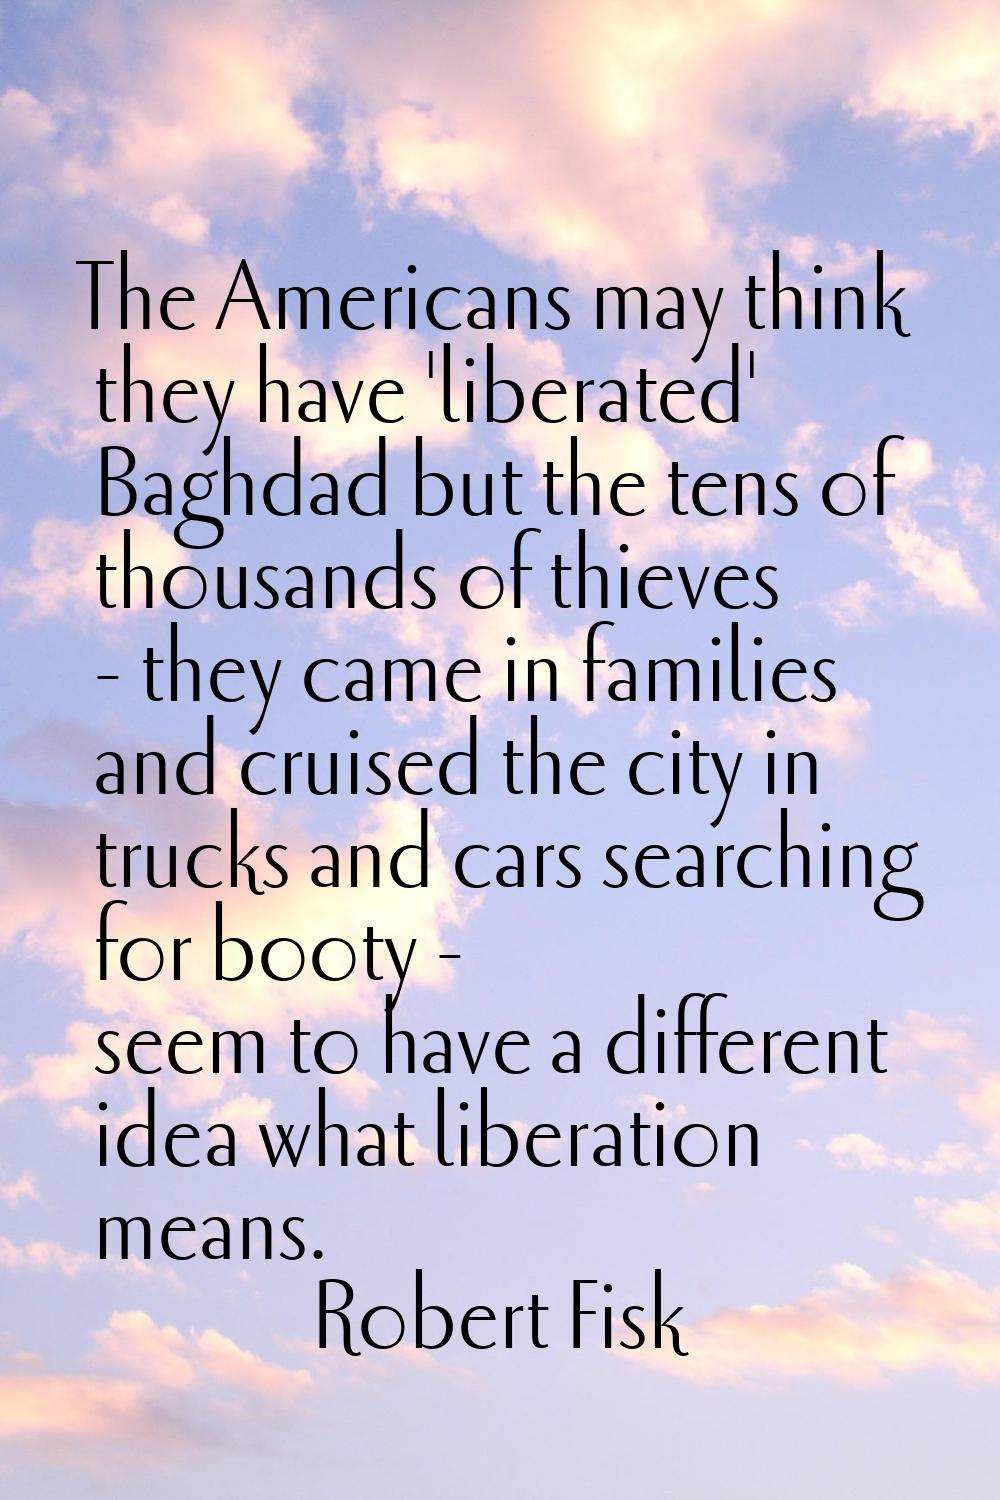 The Americans may think they have 'liberated' Baghdad but the tens of thousands of thieves - they c